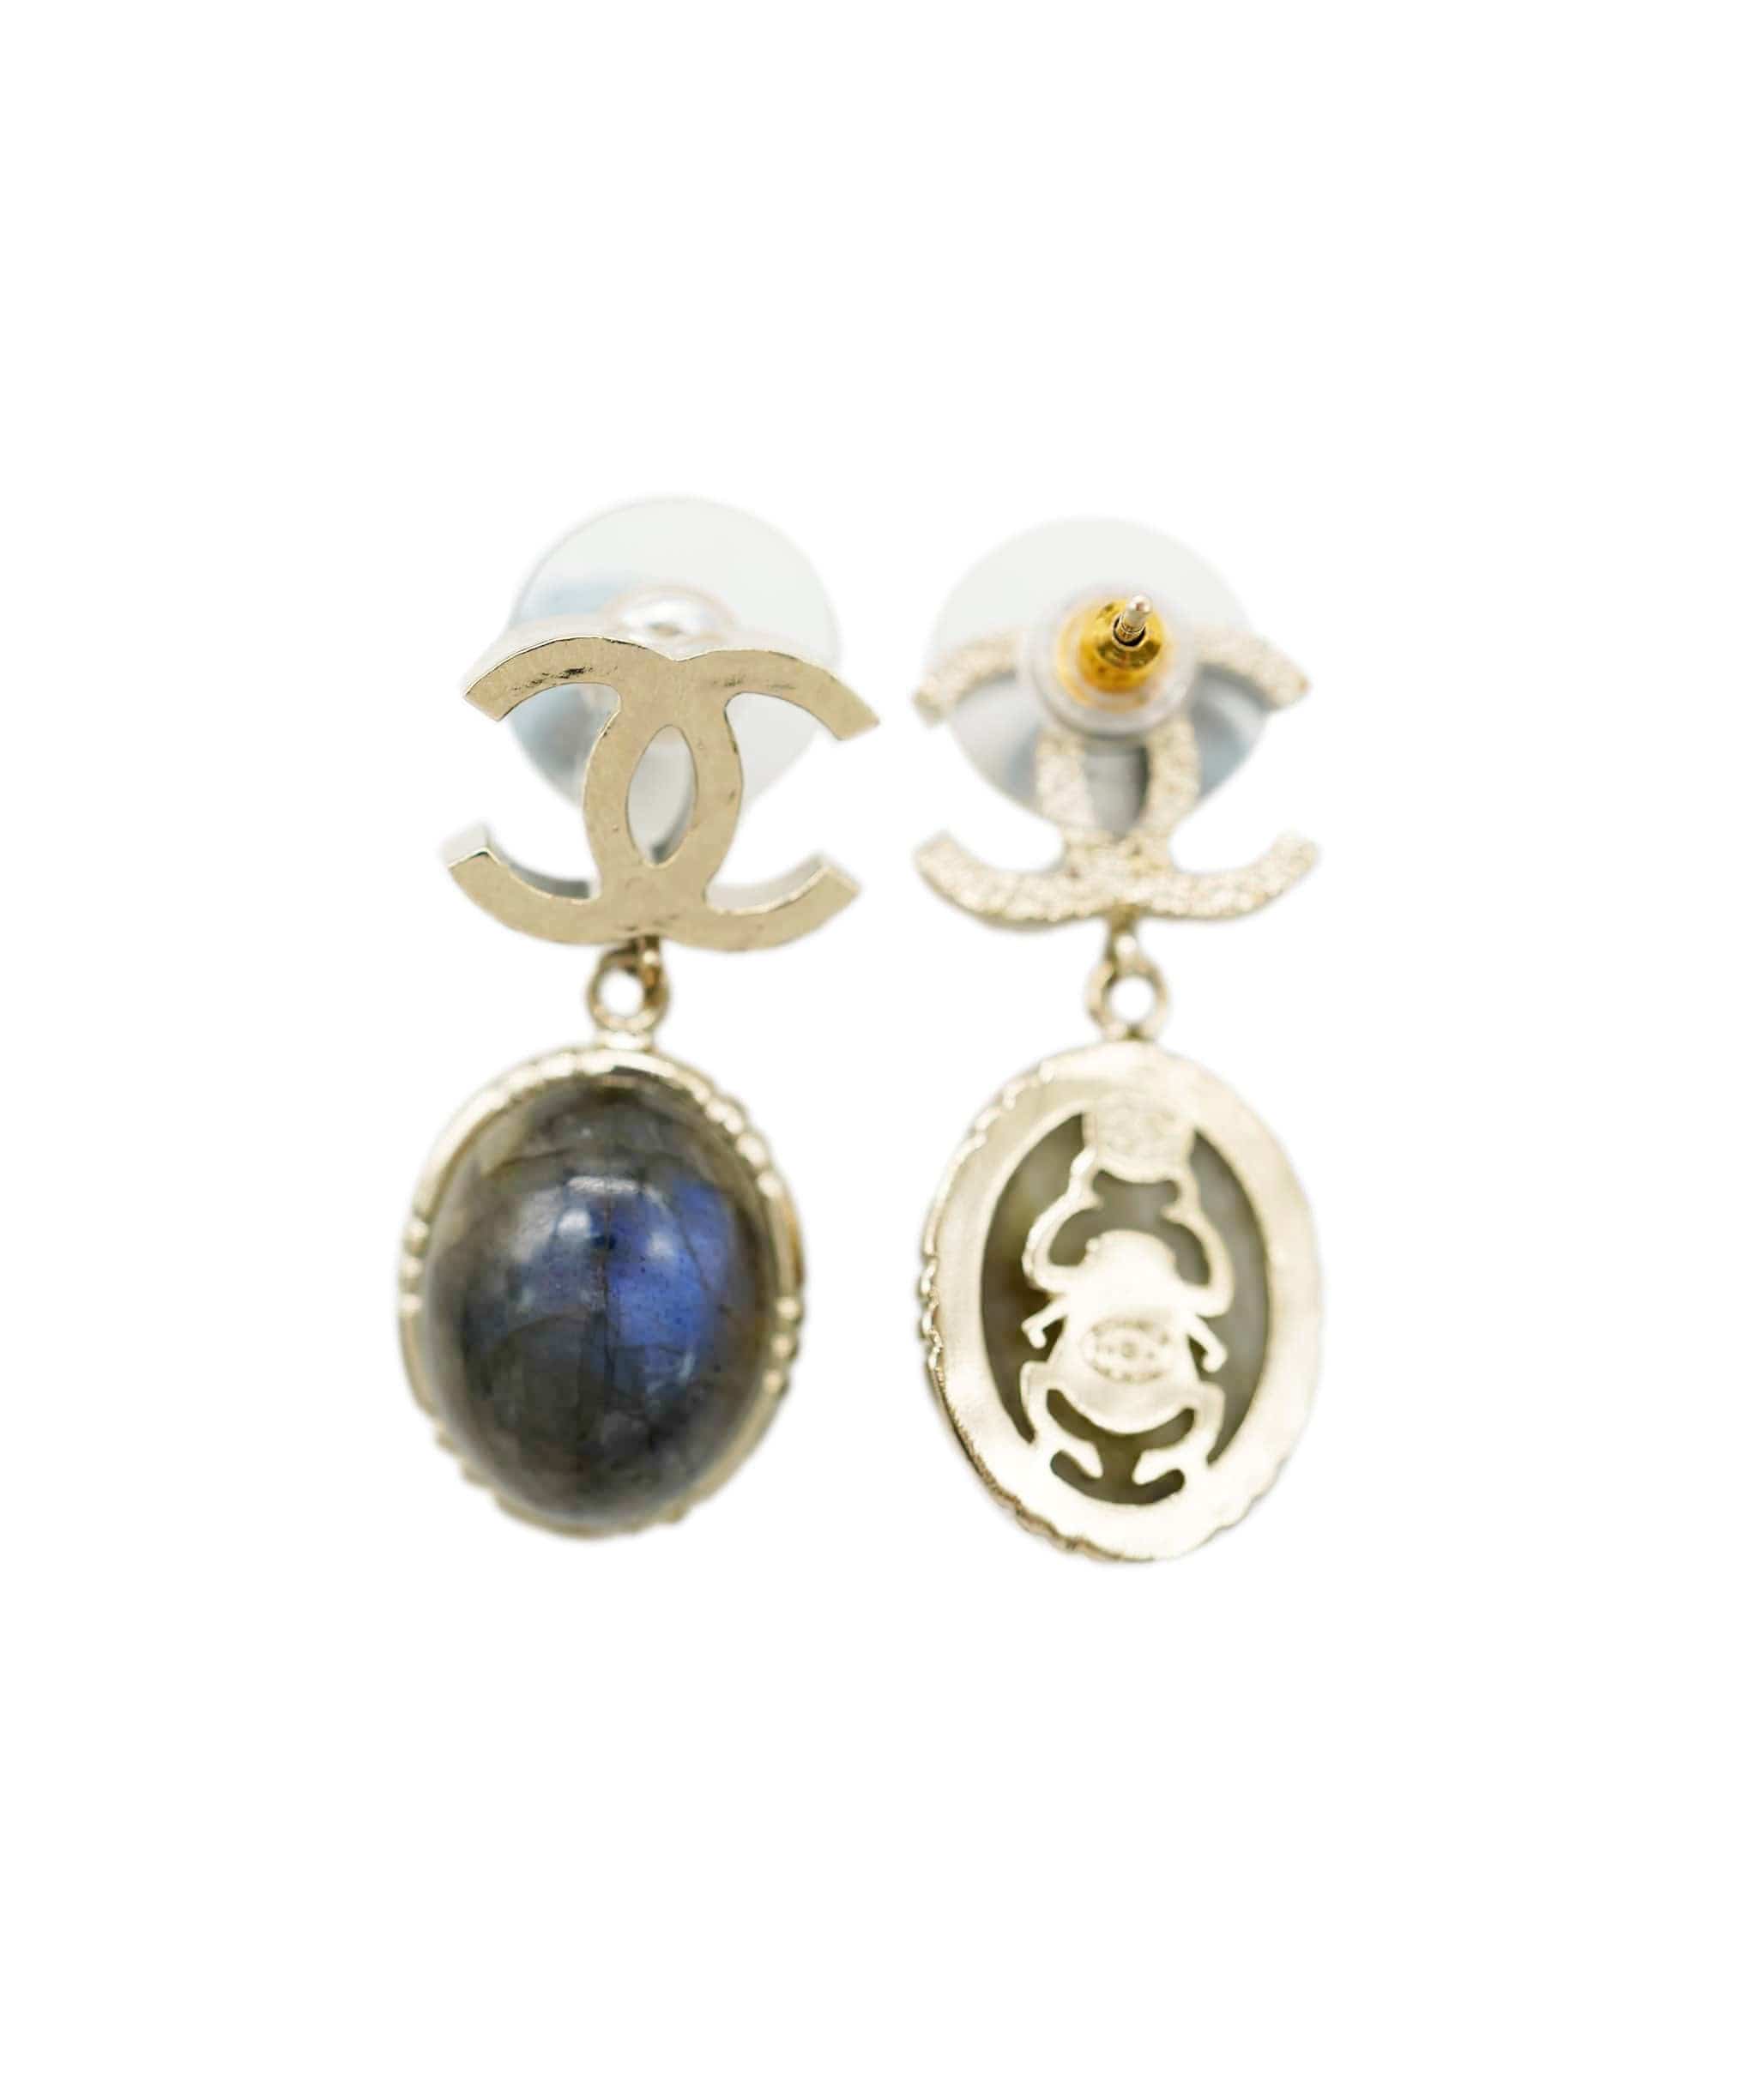 Chanel Chanel CC earrings with glass moonstone  ADC1176